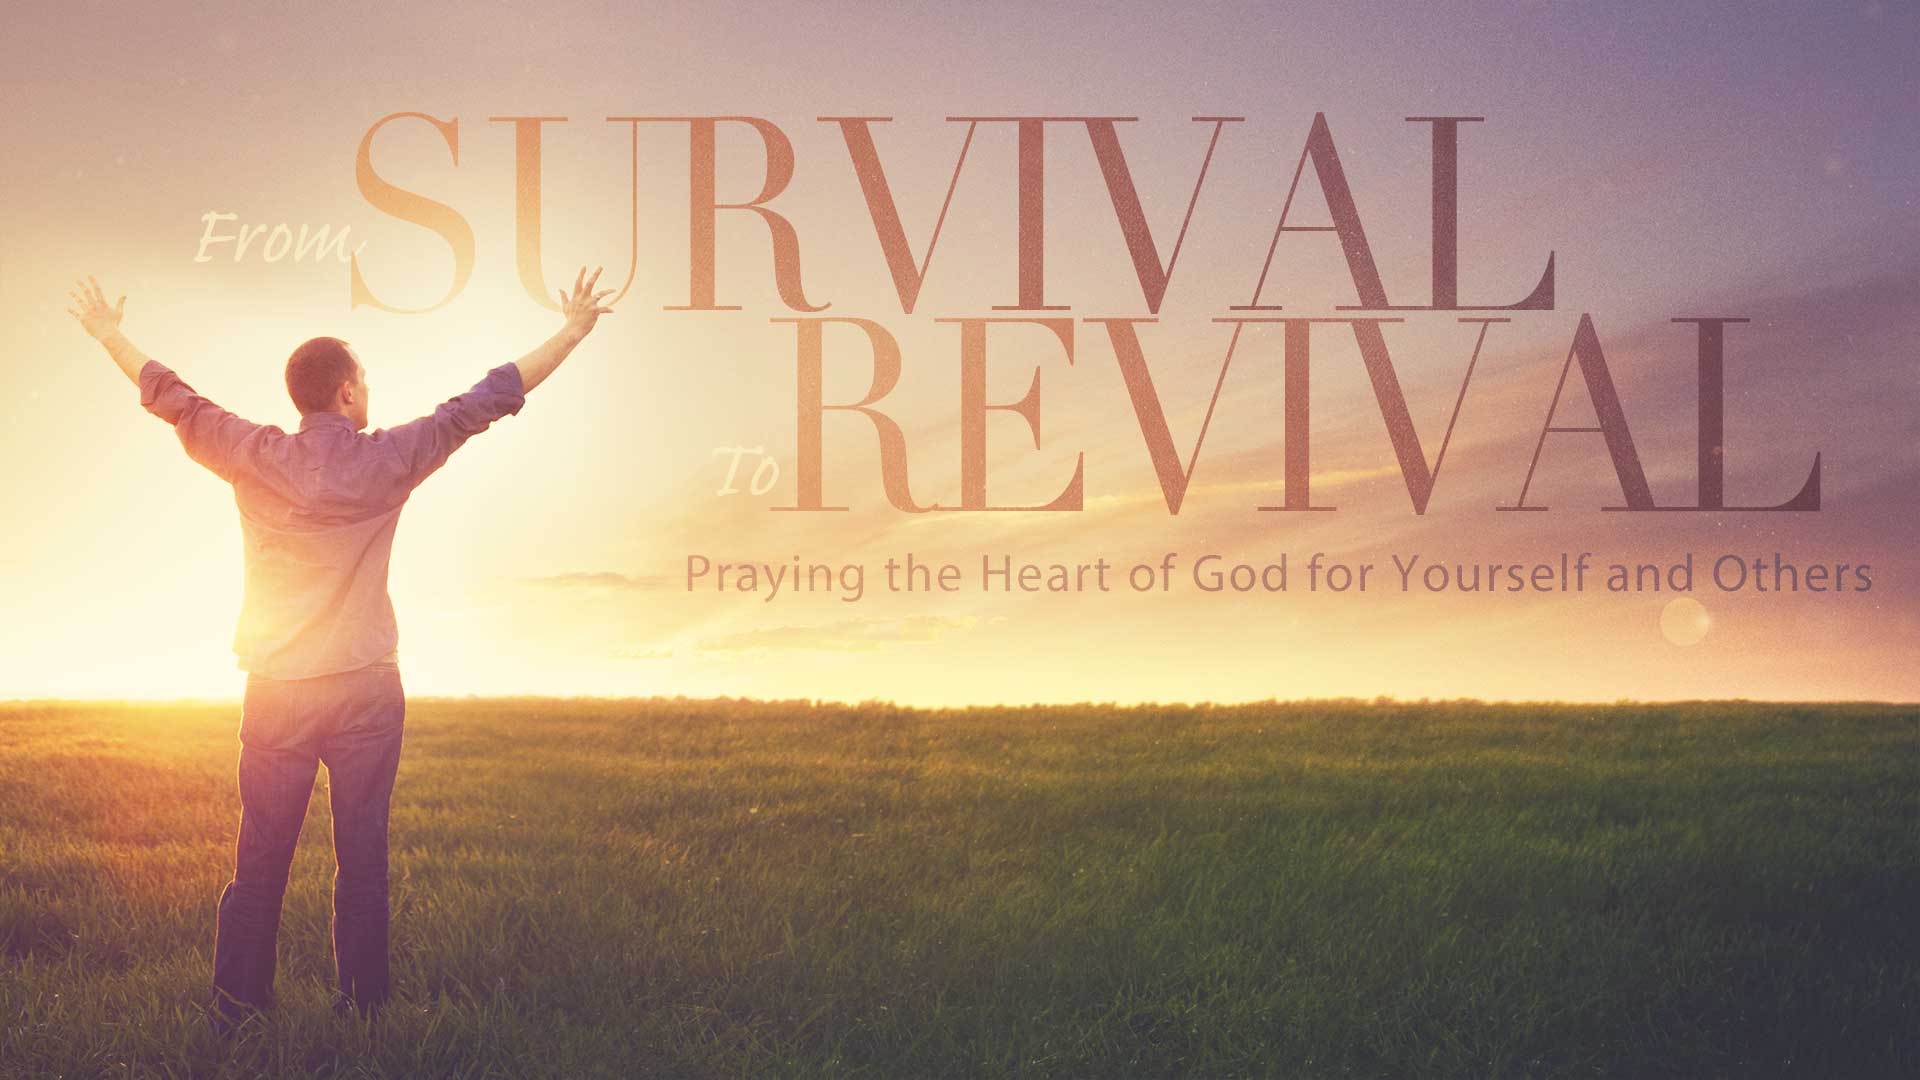 From Survival To Revival: Week 9 Image